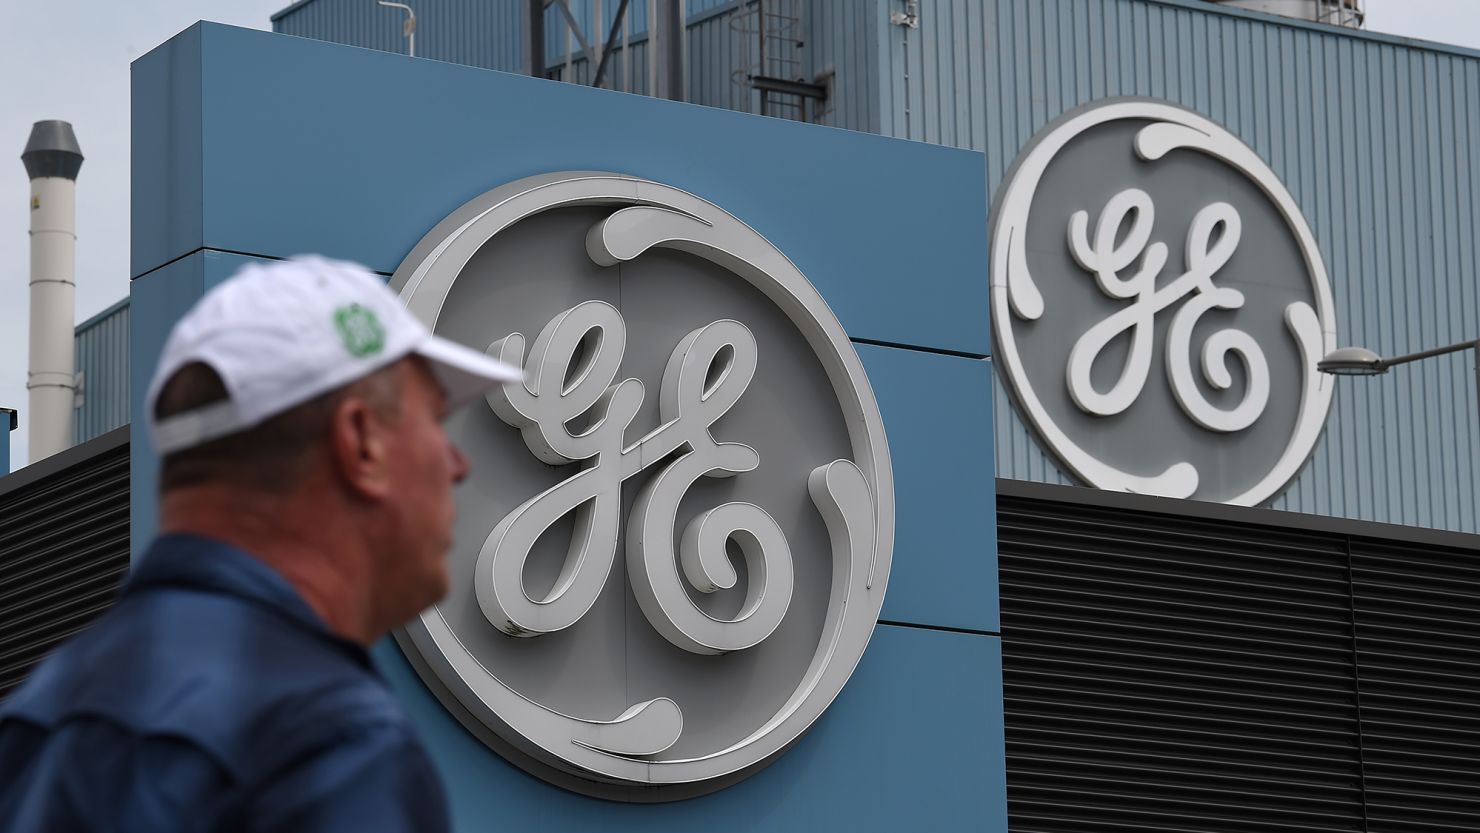 Years of sales and spinoff at General Electric reached their completion Tuesday as what was left of the company was split into two separate firms, GE Aerospace, which builds jet engines, and GE Vernova, which provides electrical power systems.